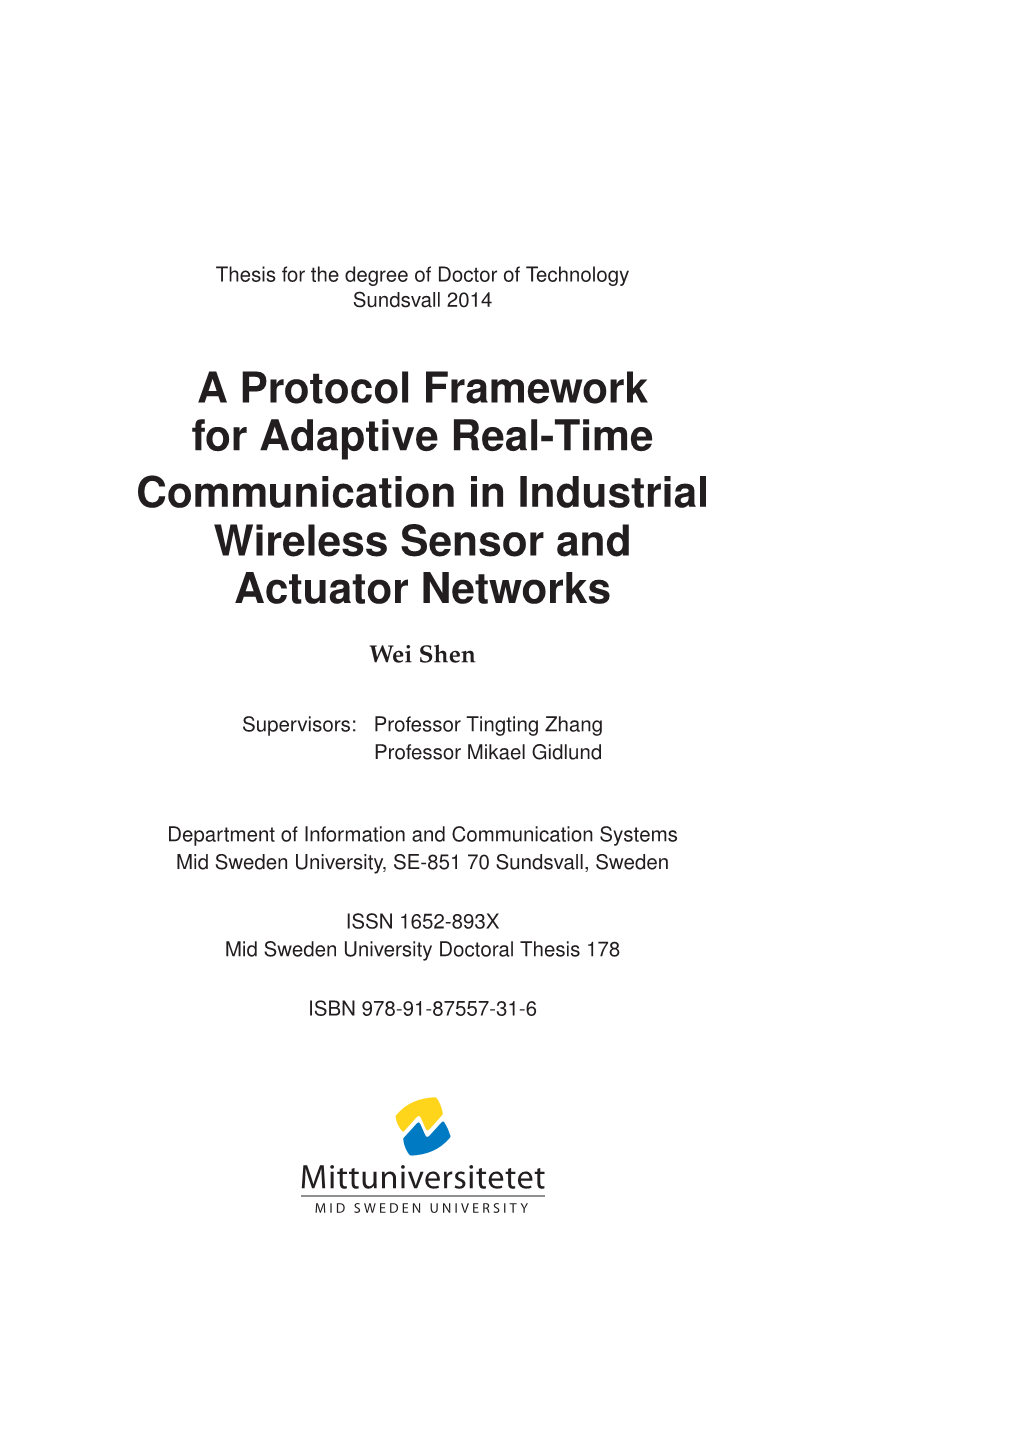 A Protocol Framework for Adaptive Real-Time Communication in Industrial Wireless Sensor and Actuator Networks